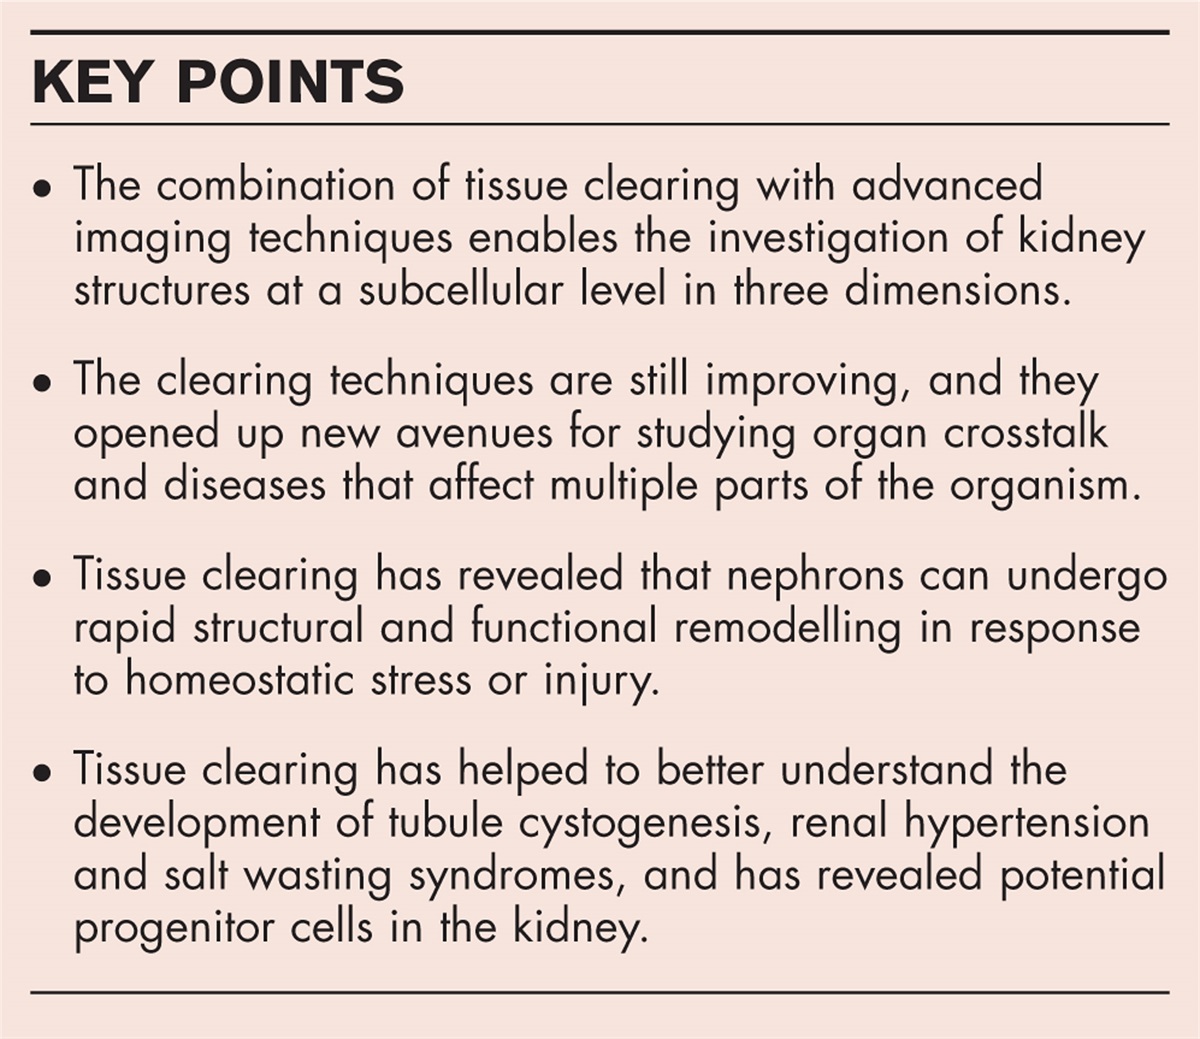 The use of tissue clearing to study renal transport mechanisms and kidney remodelling